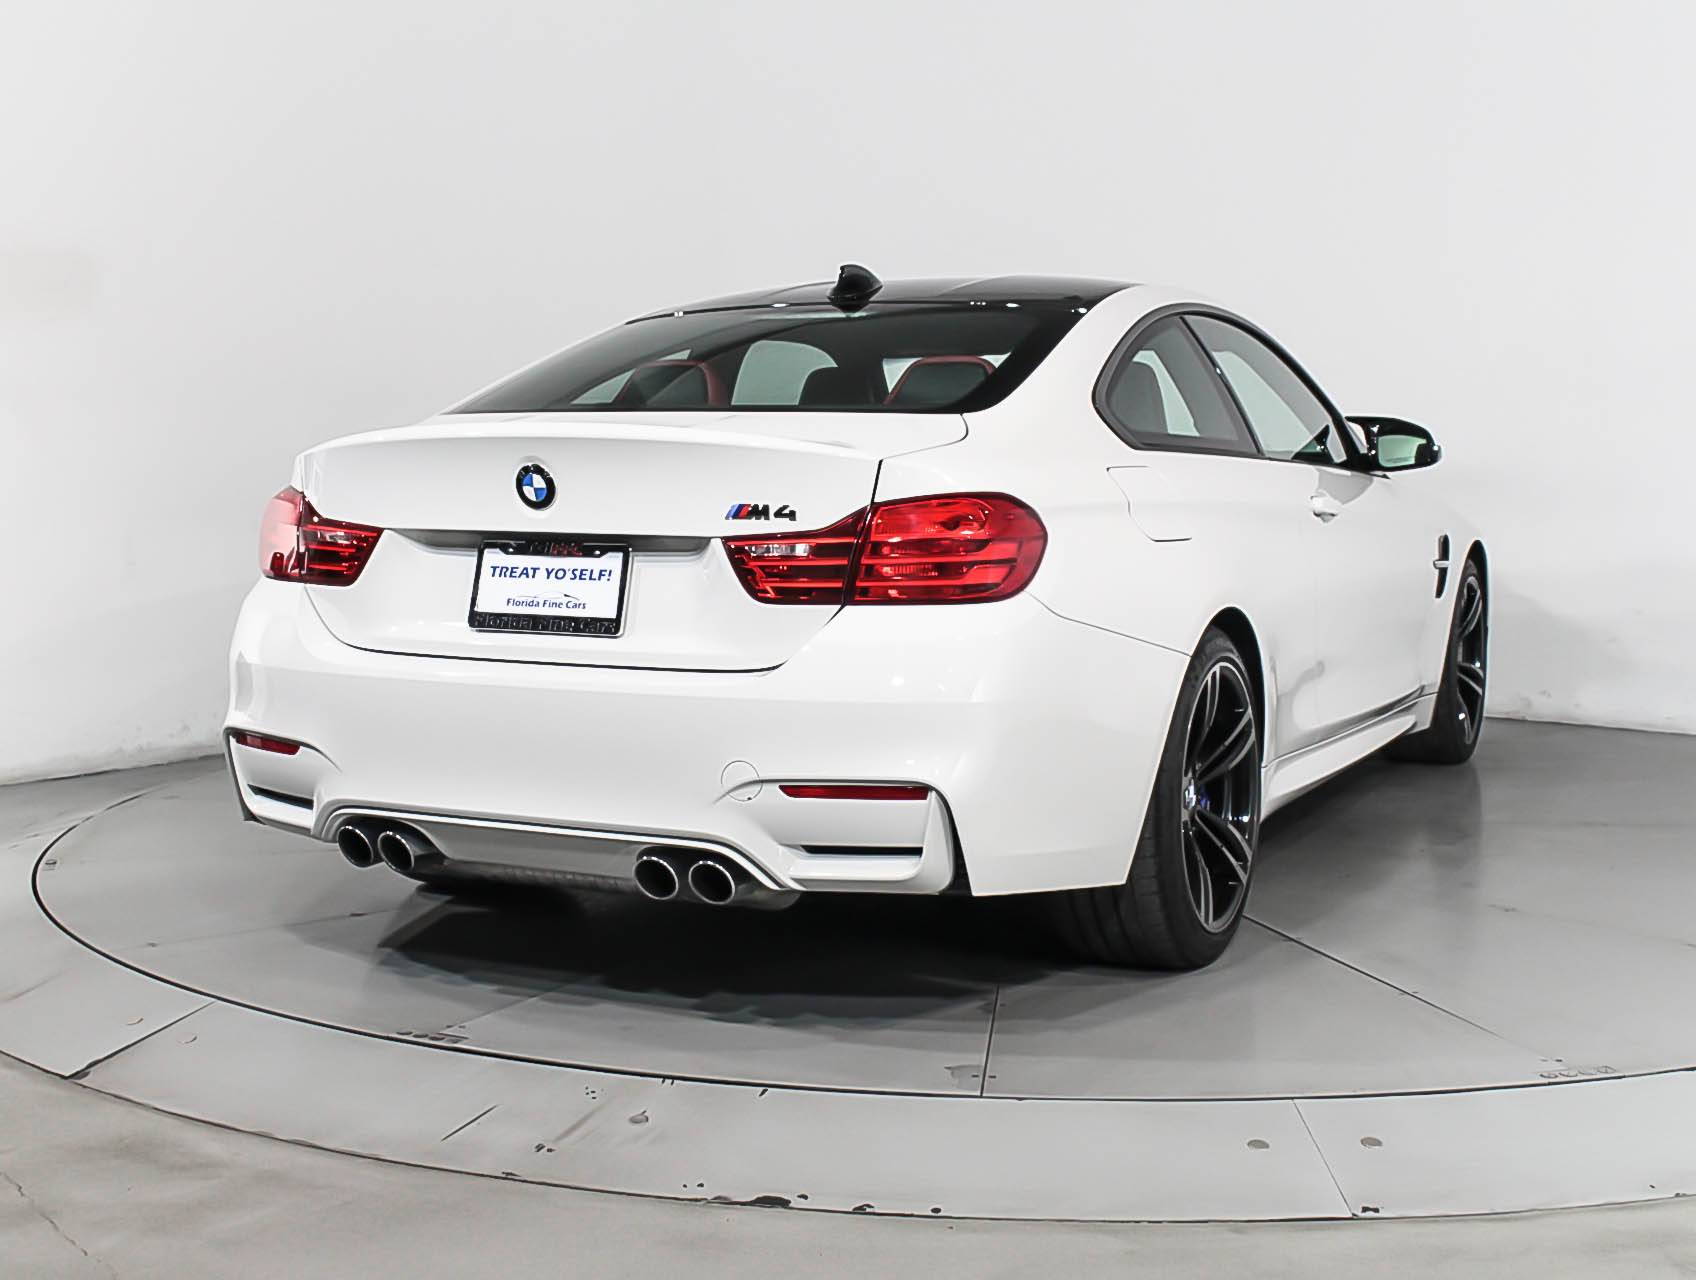 Florida Fine Cars - Used BMW M4 2015 WEST PALM Coupe